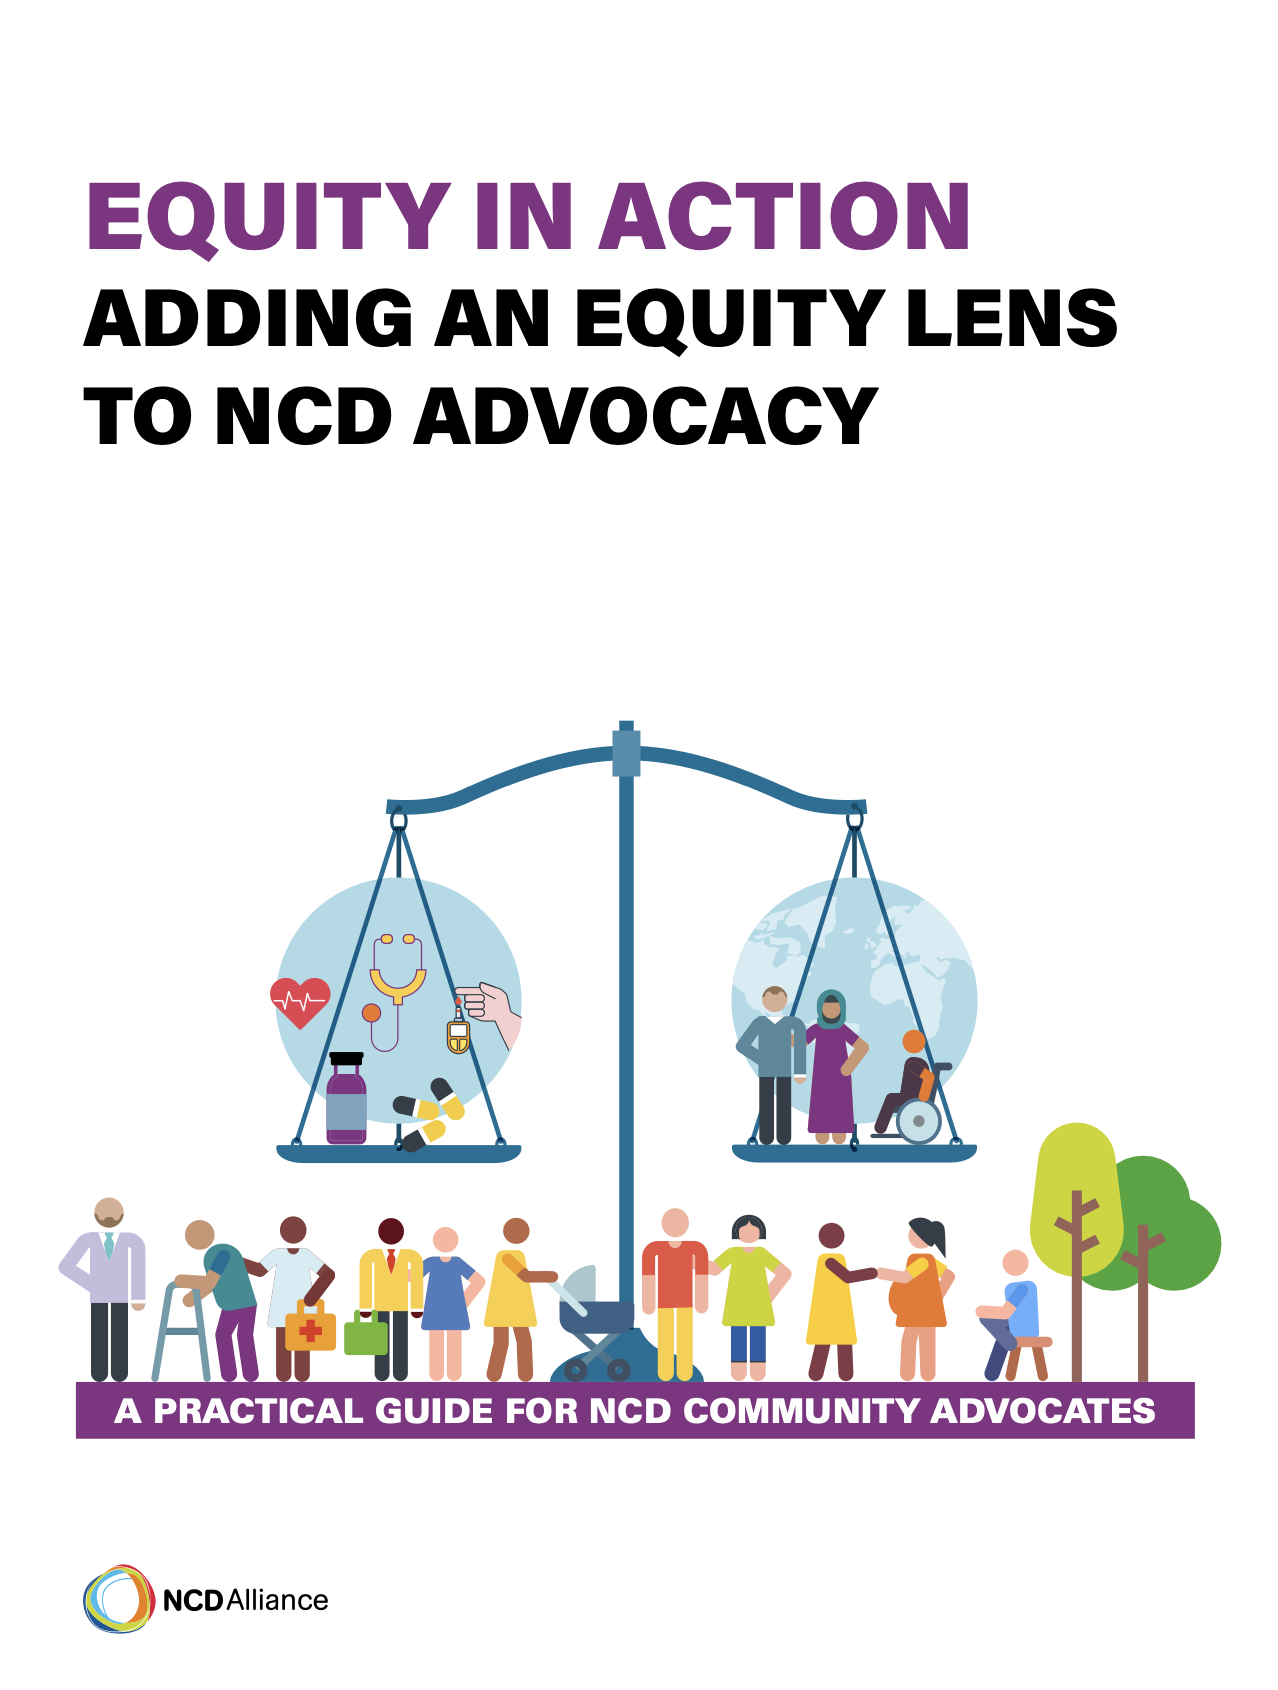 EQUITY IN ACTION ADDING AN EQUITY LENS TO NCD ADVOCACY